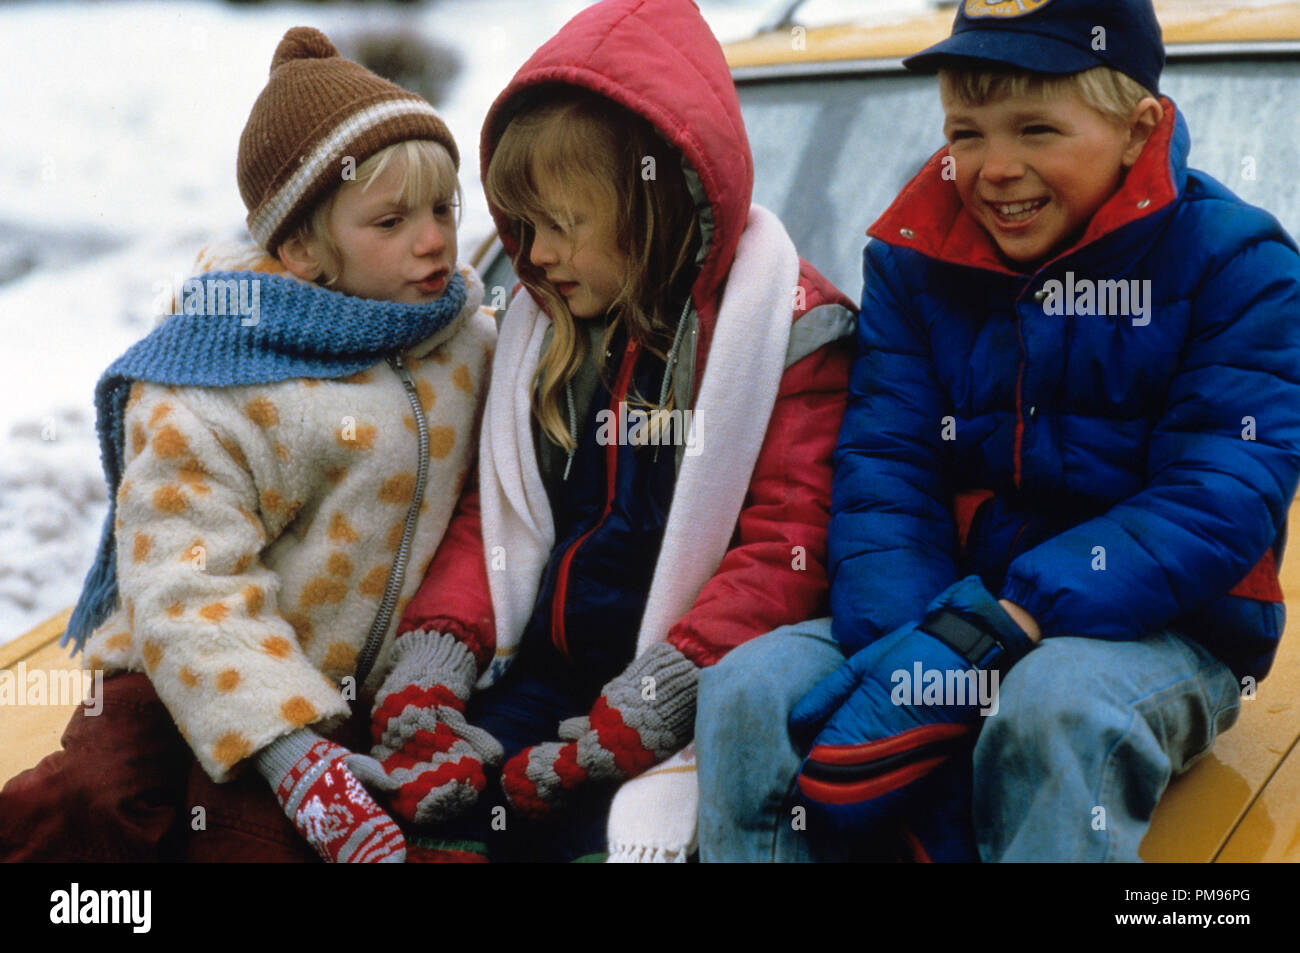 Studio Publicity Still from 'One Magic Christmas' Sarah Polley, Elisabeth Harnois, Robbie Magwood © 1985 Walt Disney Pictures  All Rights Reserved   File Reference # 31703178THA  For Editorial Use Only Stock Photo